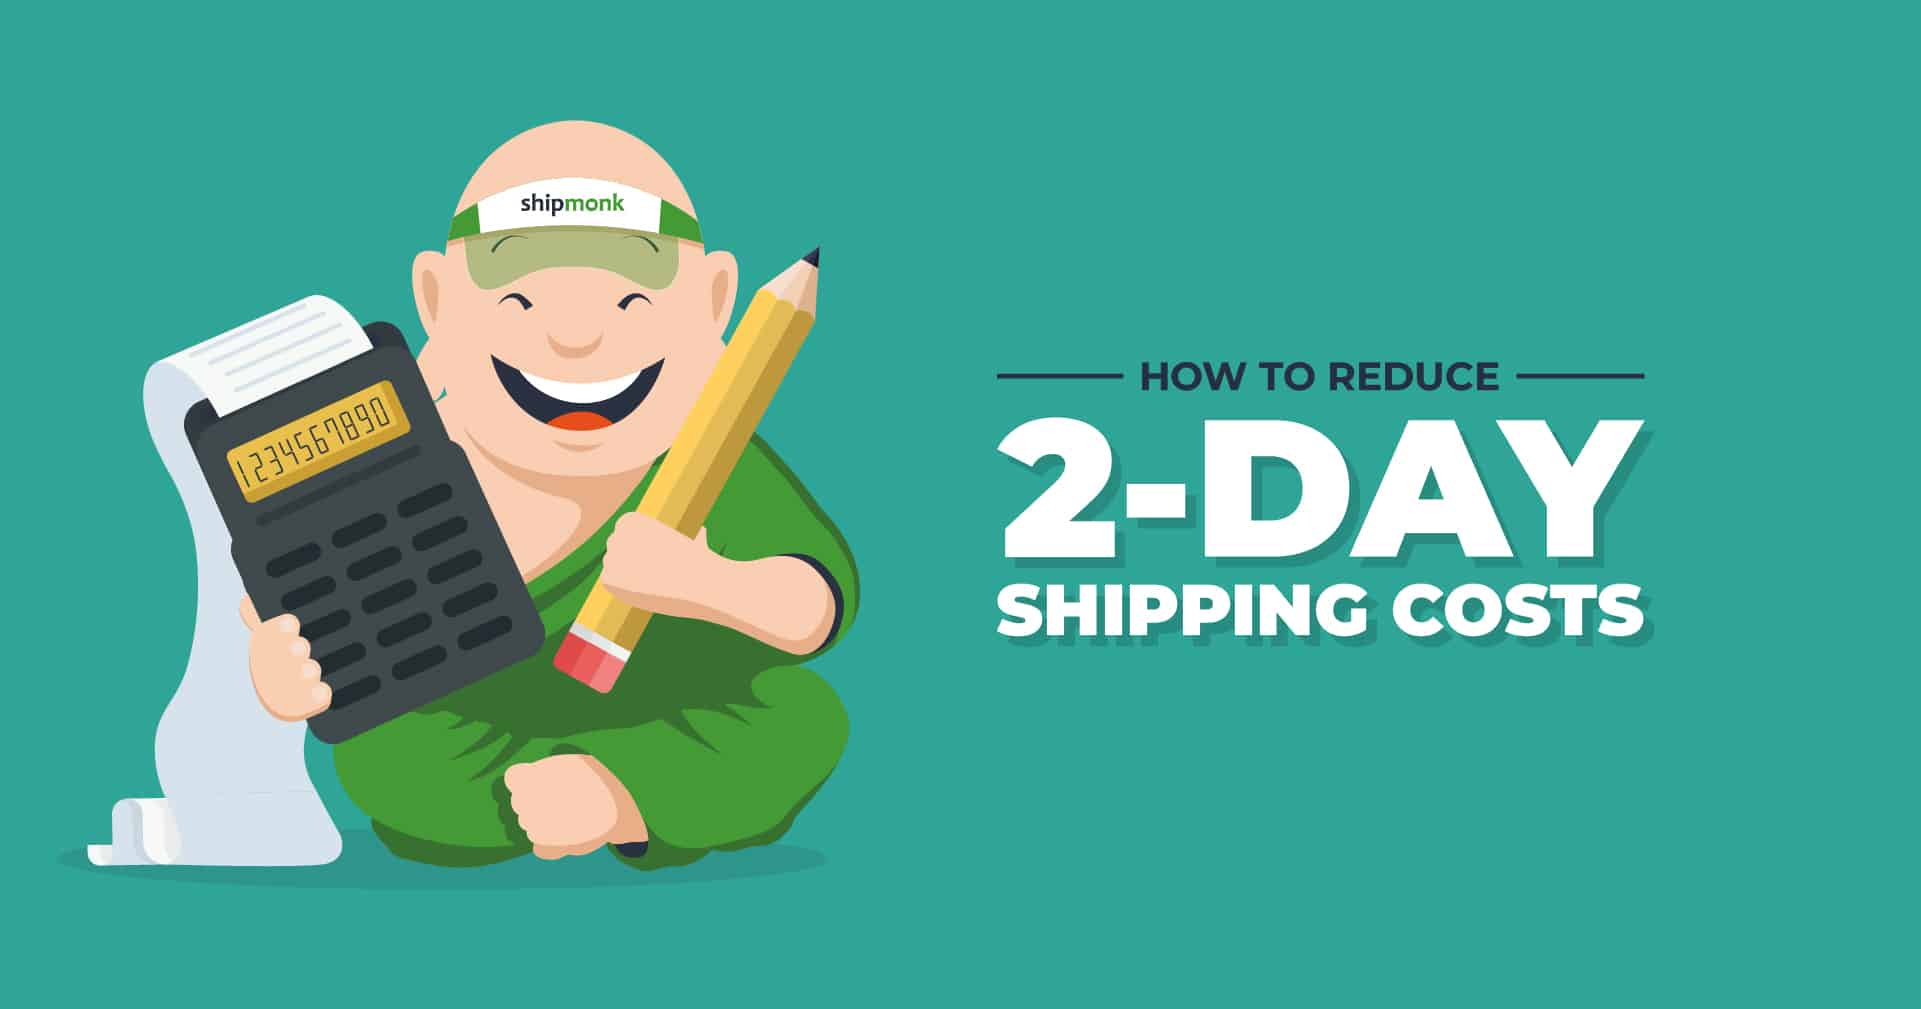 How to Reduce 2-Day Shipping Costs